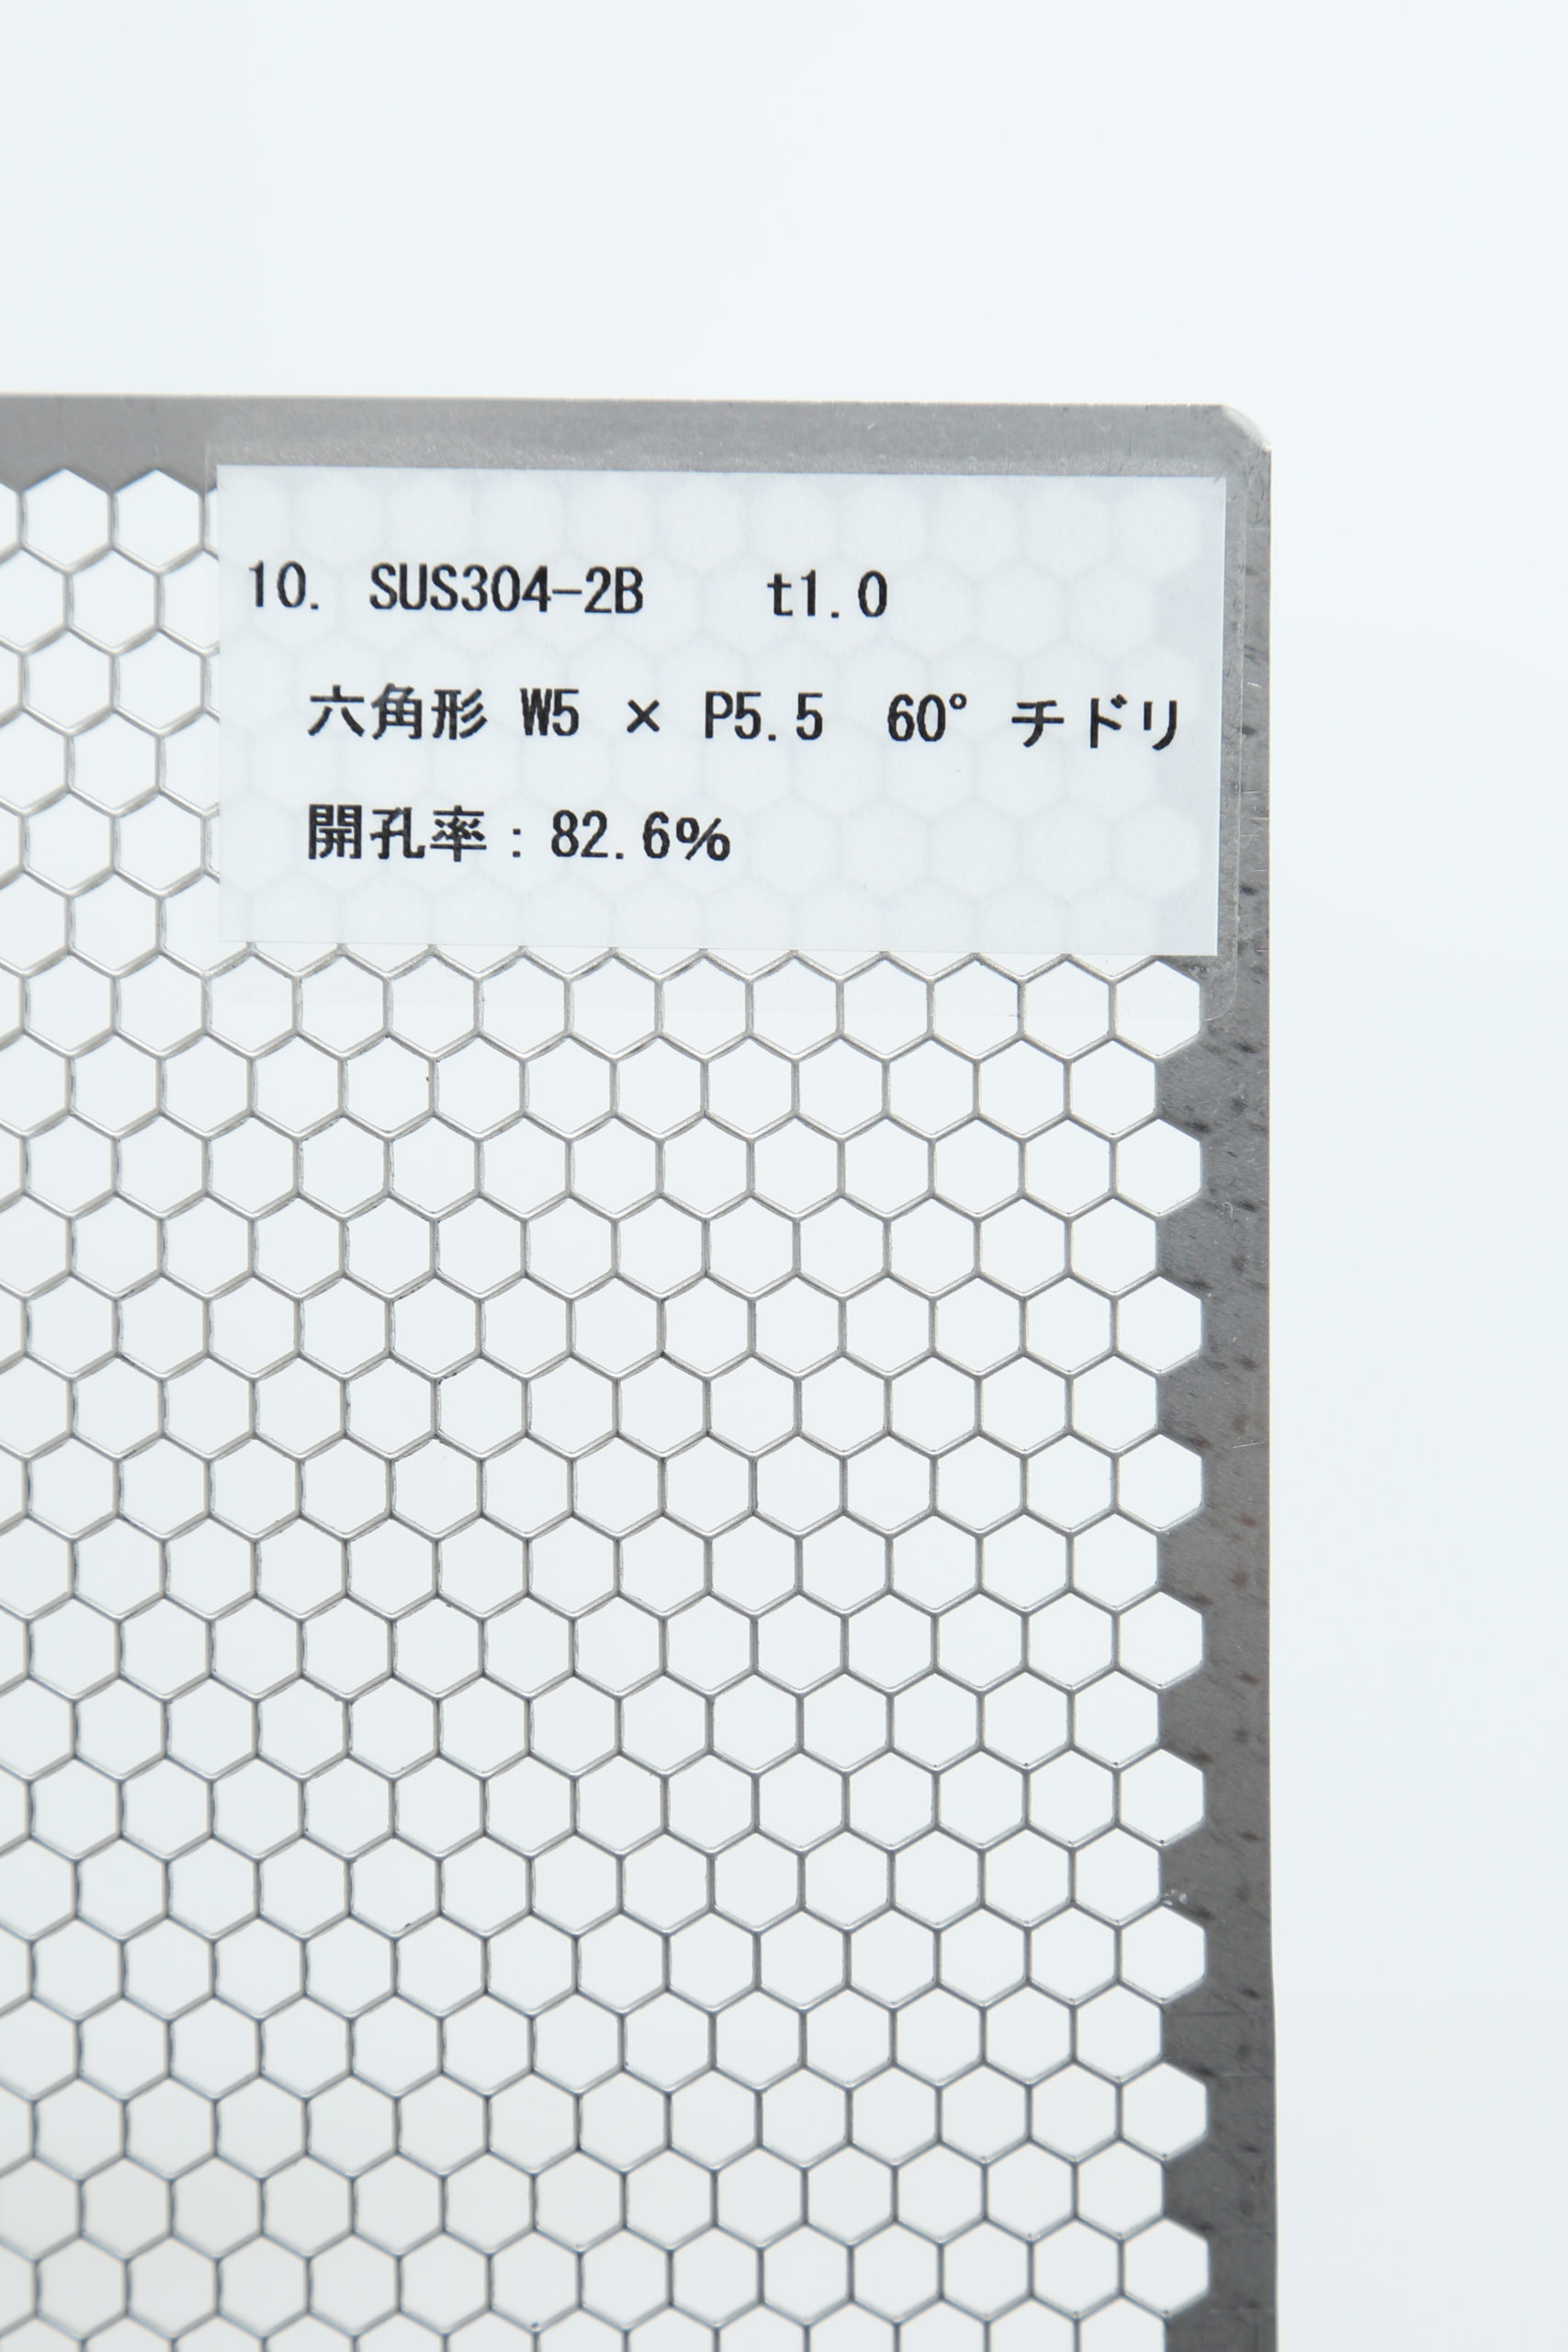 Stainless steel SUS304 with 2B finishing 1.0mm thickness Hexagonal hole W5.0mm x Pitch 5.5mm  60 degree staggered Open area : 82.6%